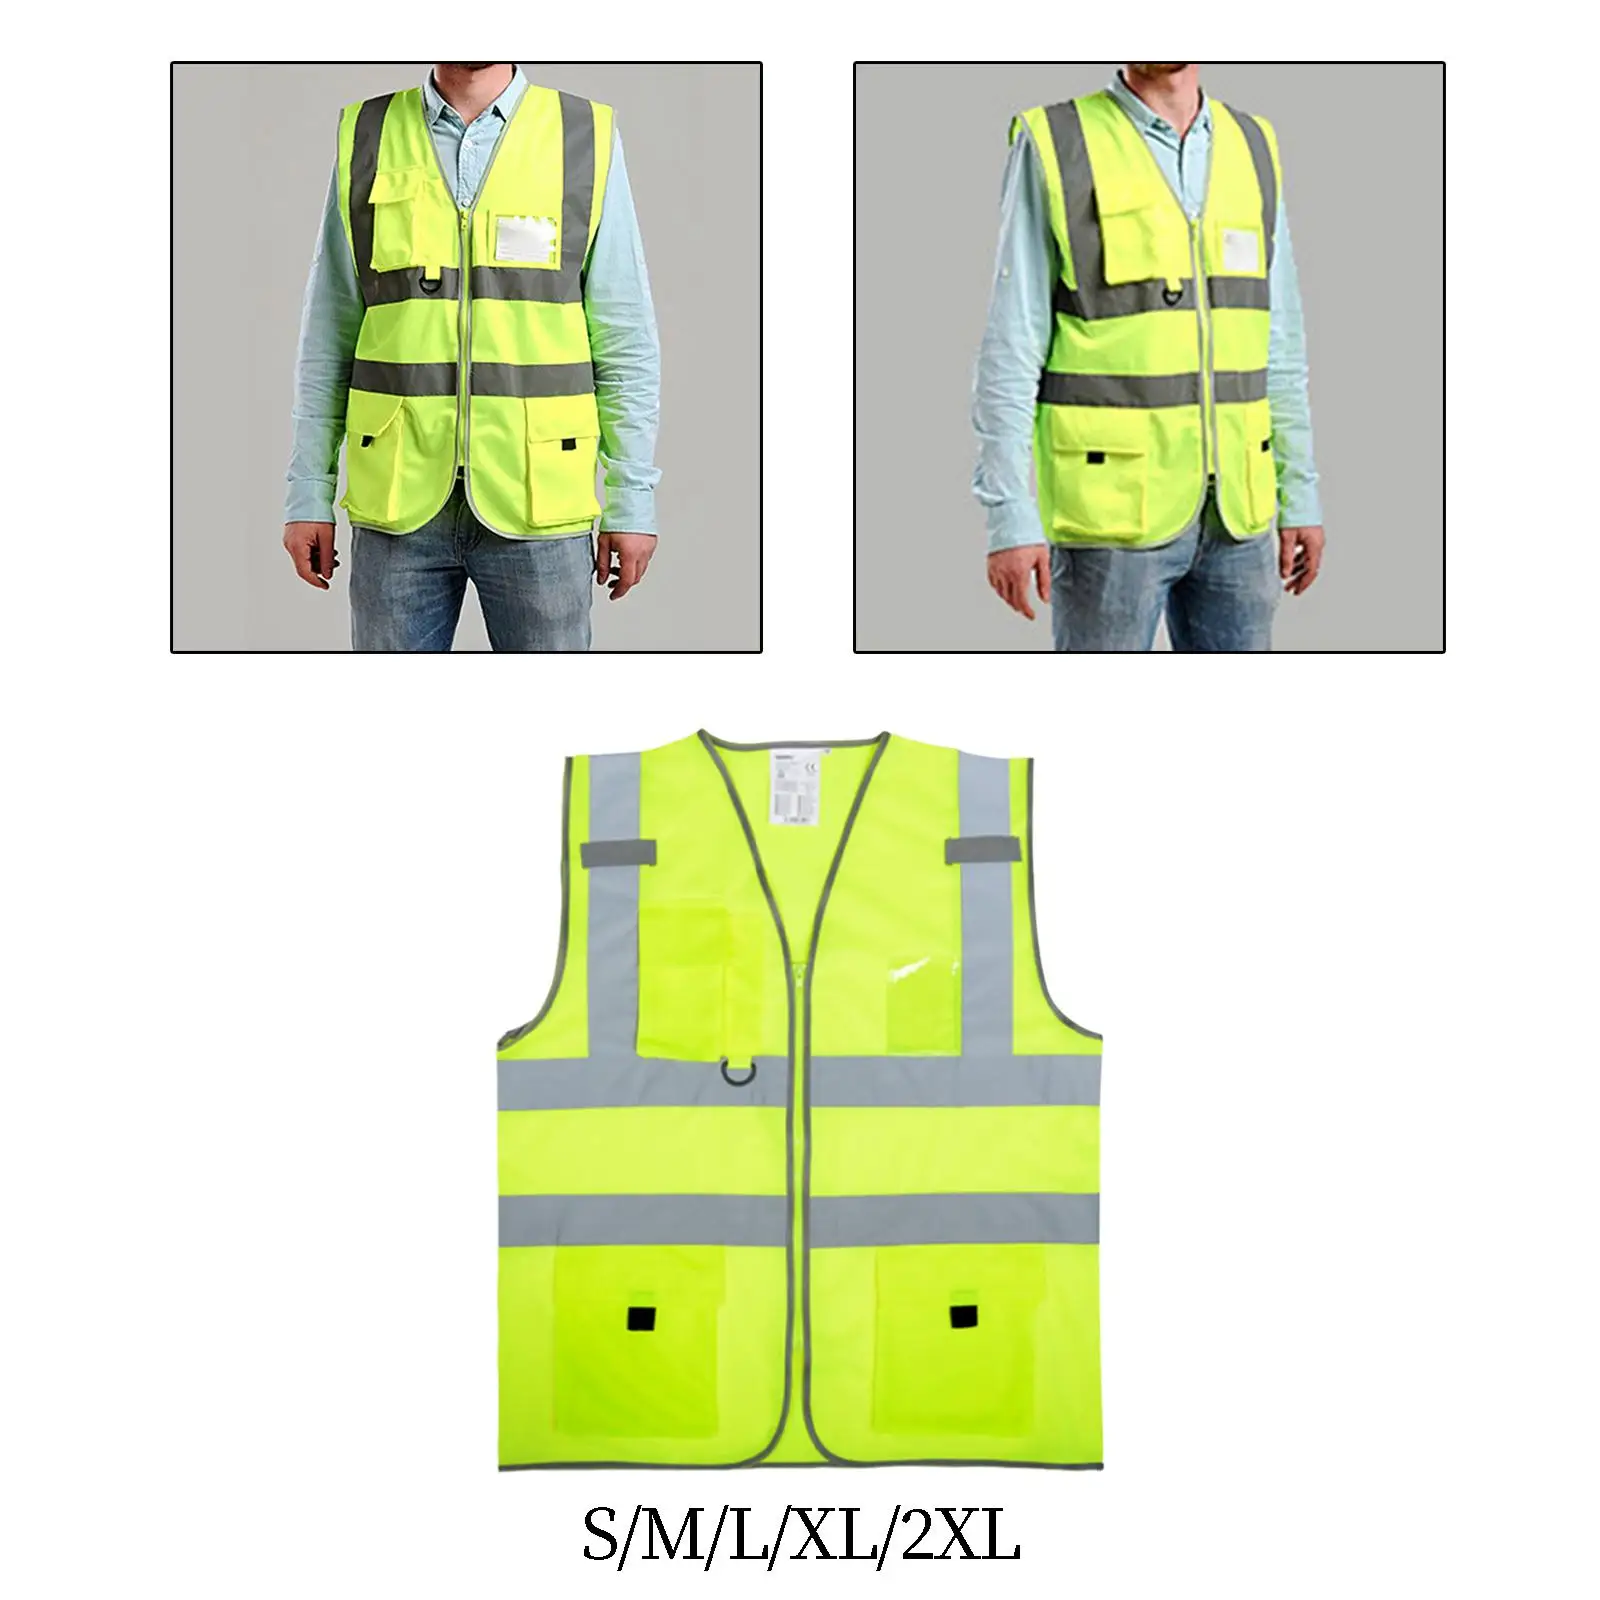 Reflective Vest Multi Pocket Reflective Safety Jacket Construction Vest for Construction Outdoor Workers Racing Running Sports